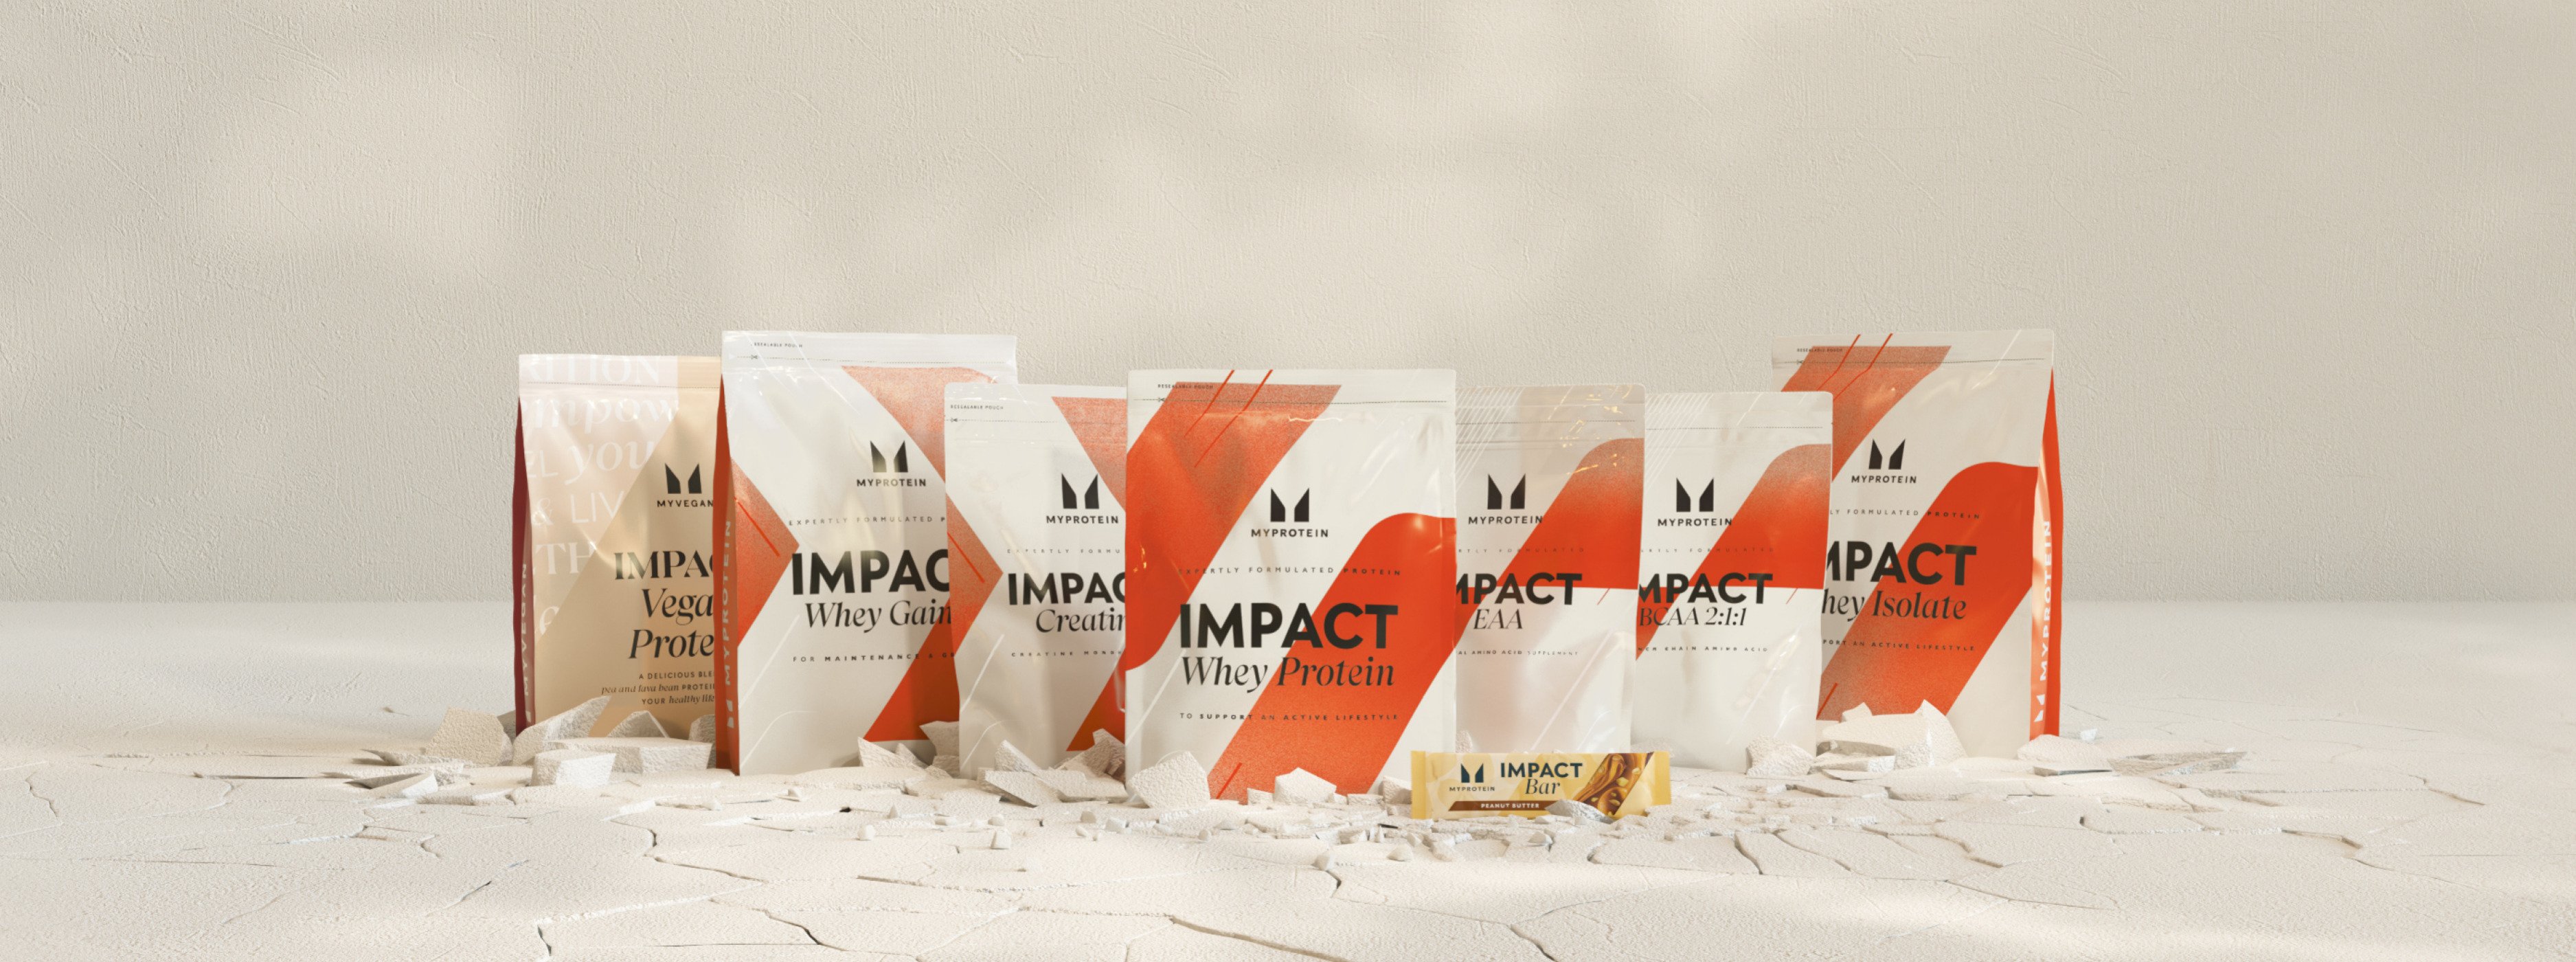 Impact Week Gives You More | All You Need To Know